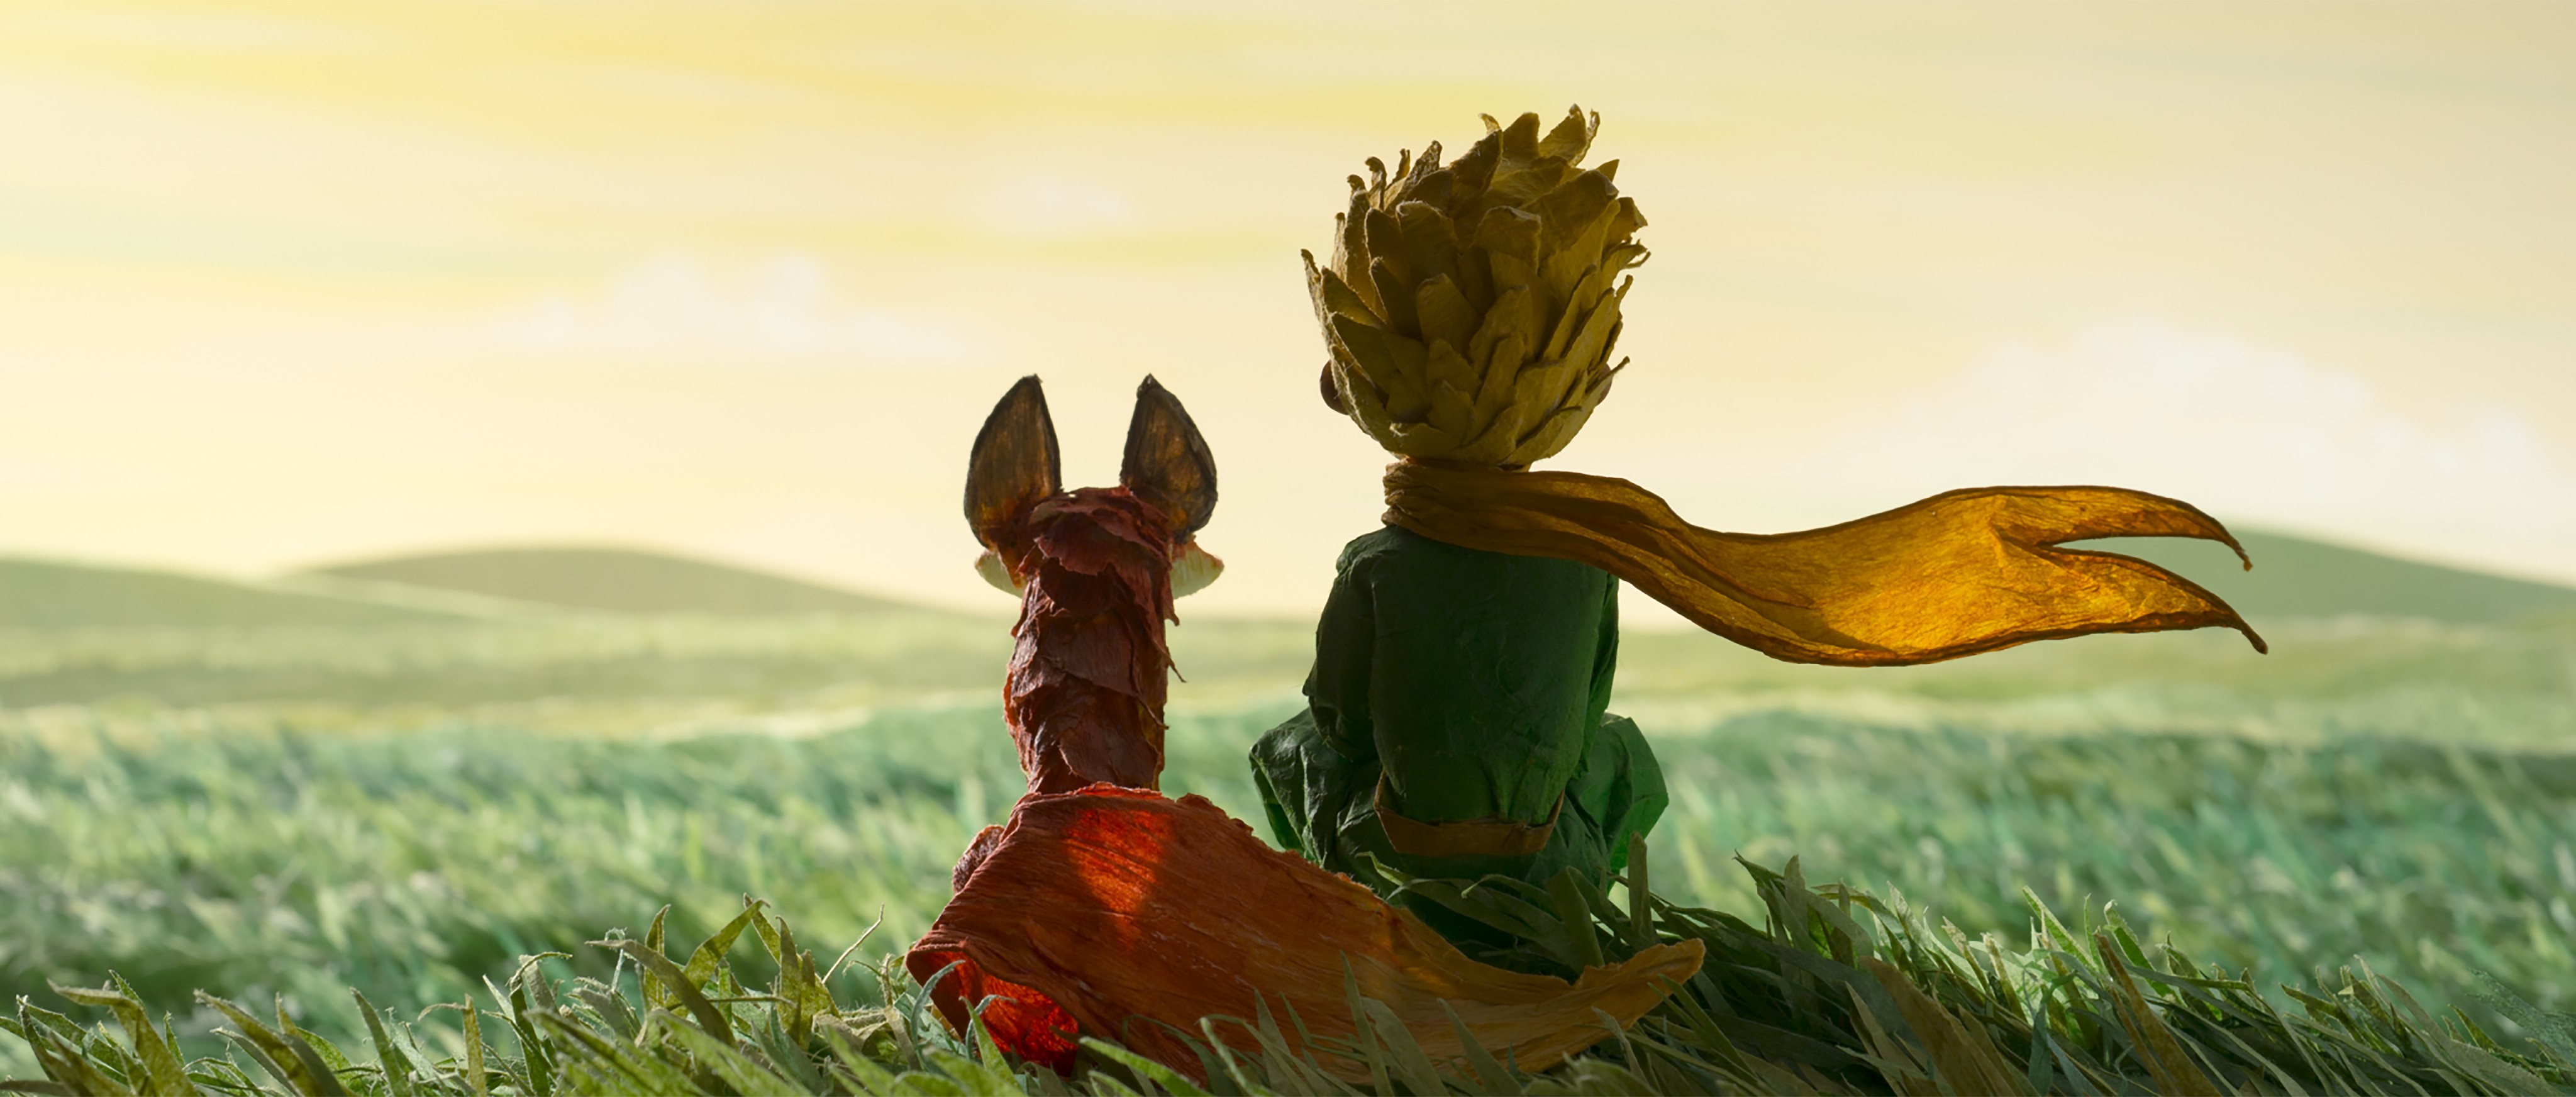 le petit prince wallpaper,grass,fictional character,plant,animation,fawn